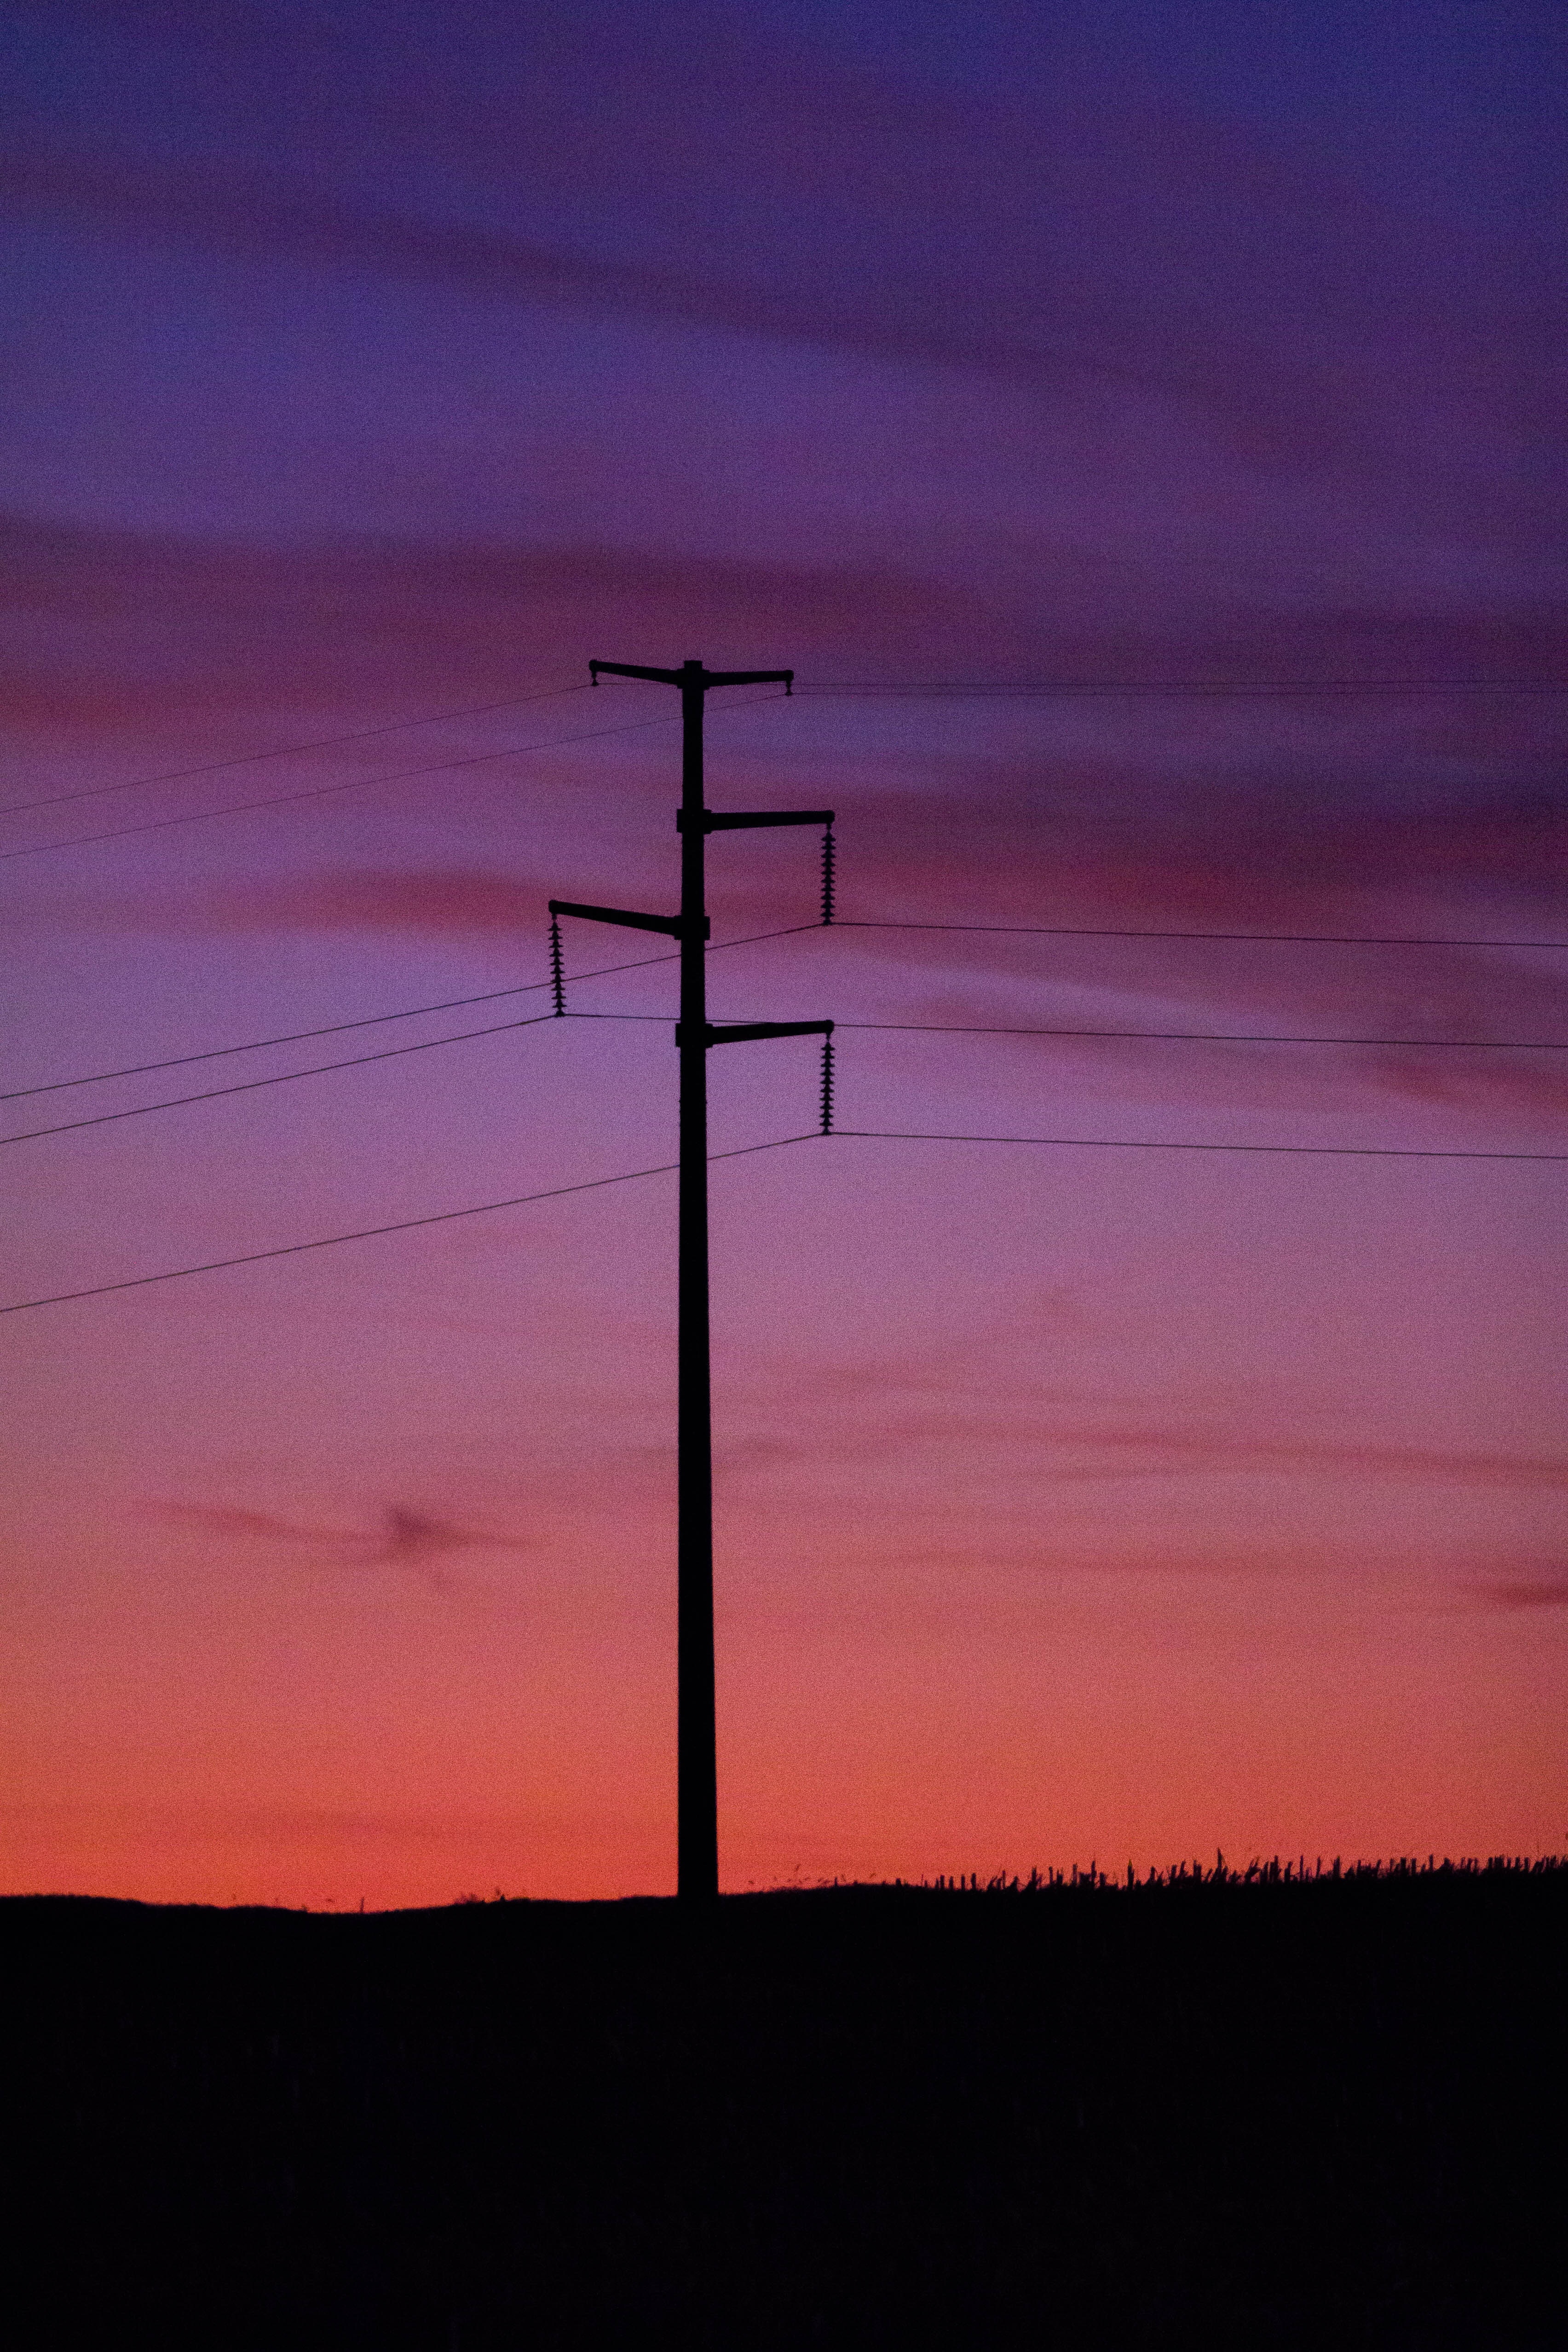 wires, nature, sunset, sky, post, pillar, wire